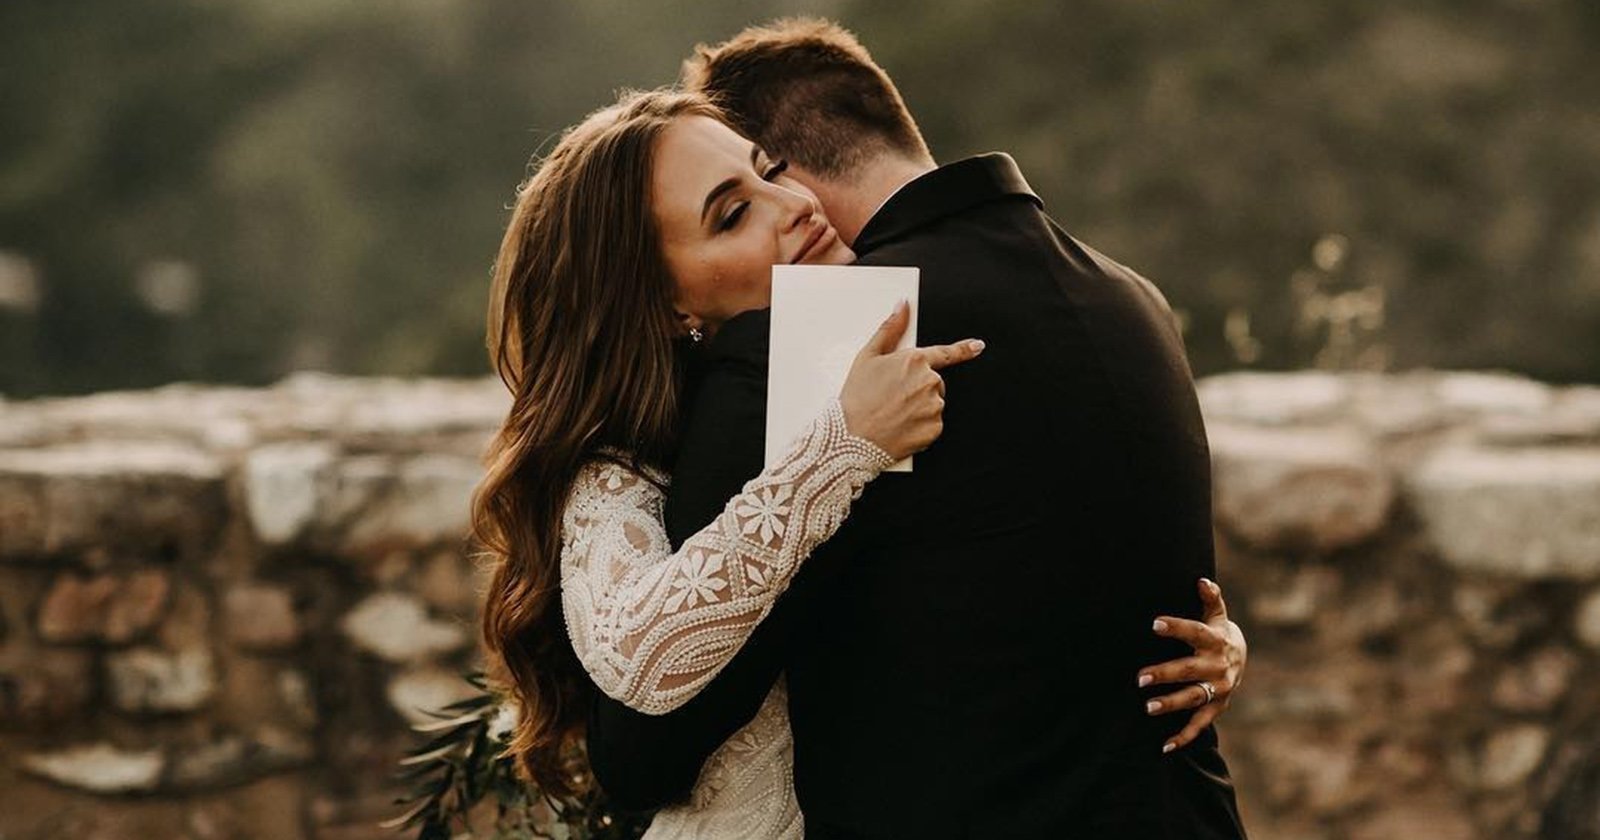 The Most Beautiful Wedding Poems For Your Vows